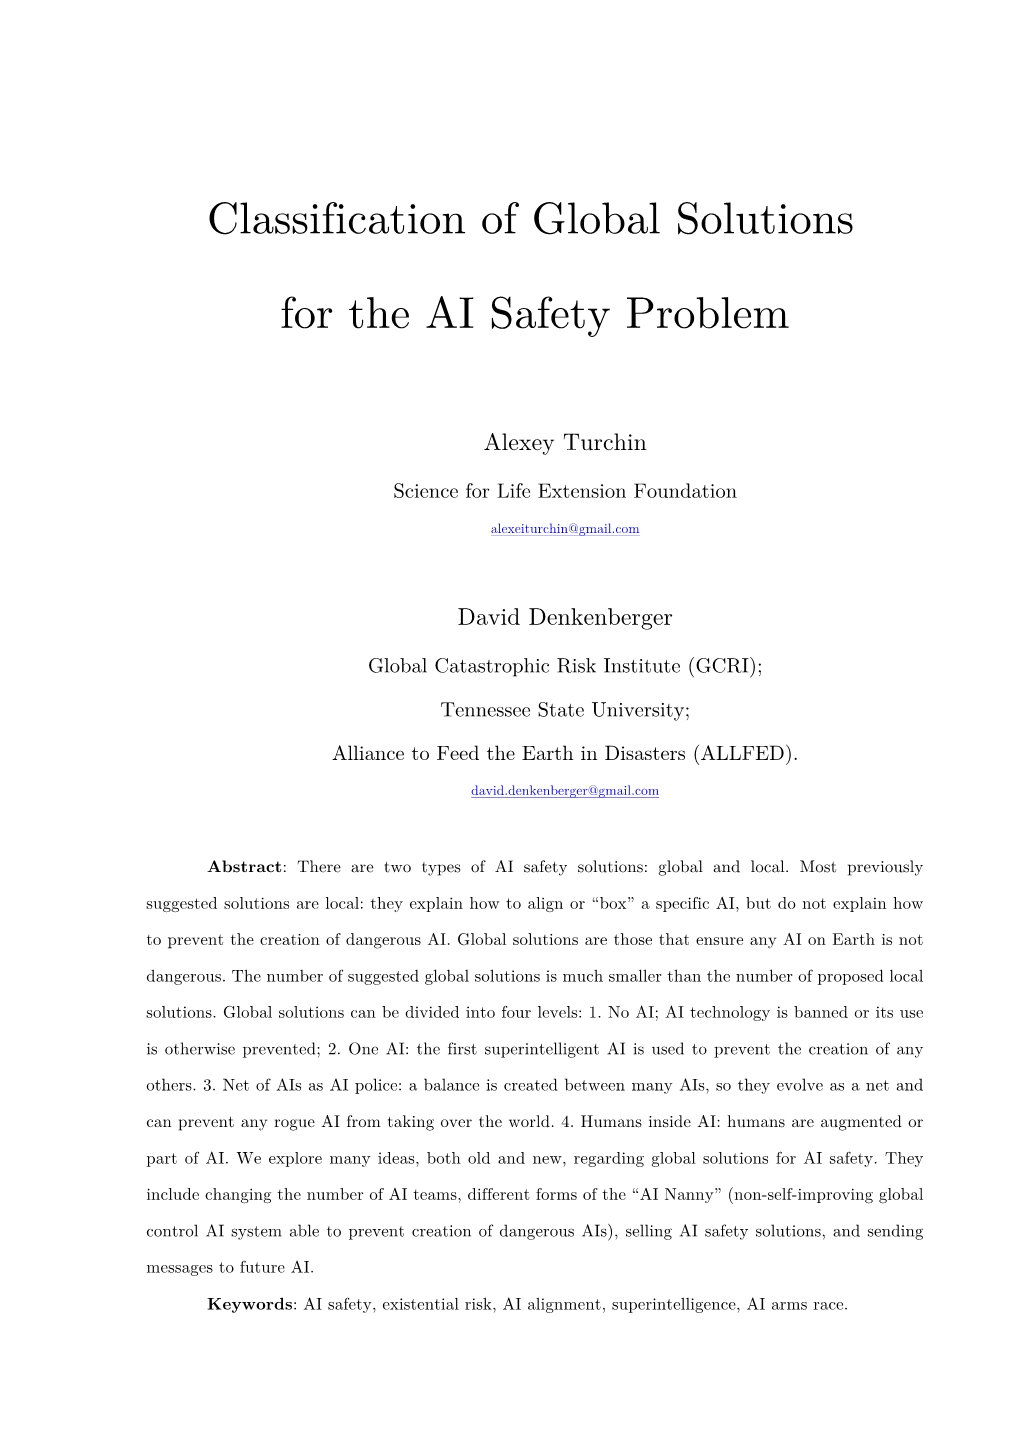 Classification of Global Solutions for the AI Safety Problem